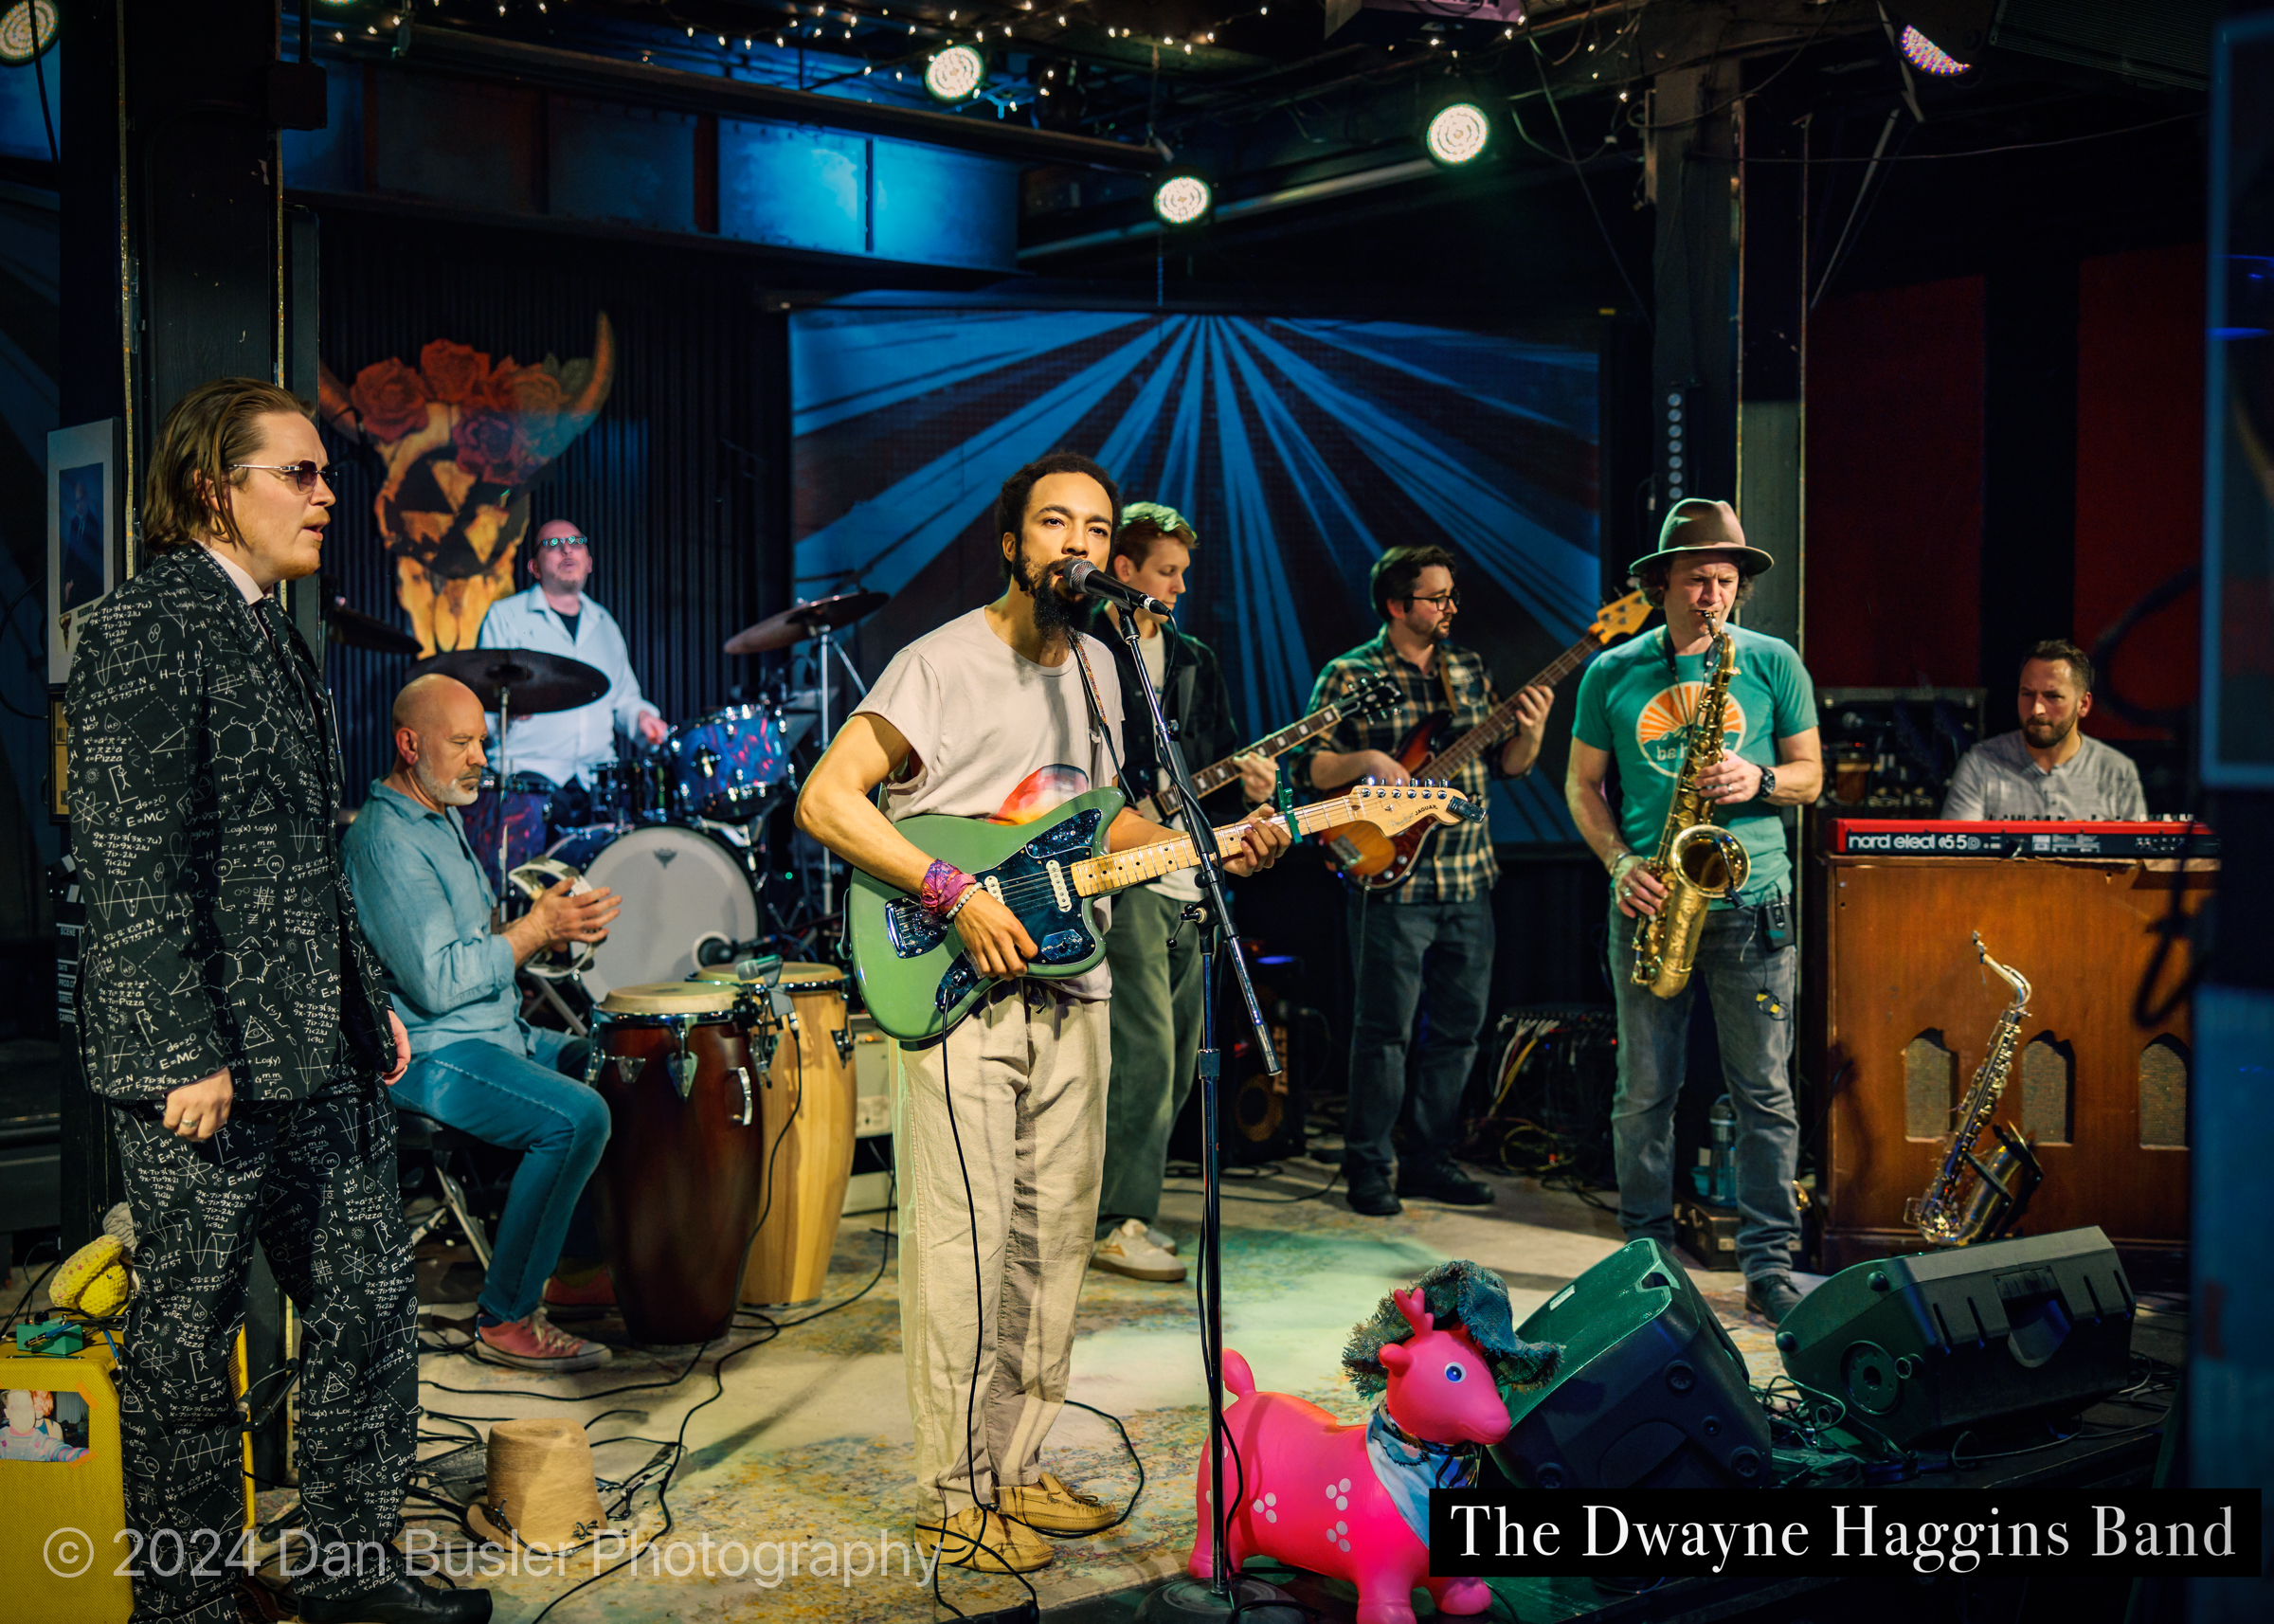 an image of the dwayne haggins band on stage at the extended play sessions in norwood ma